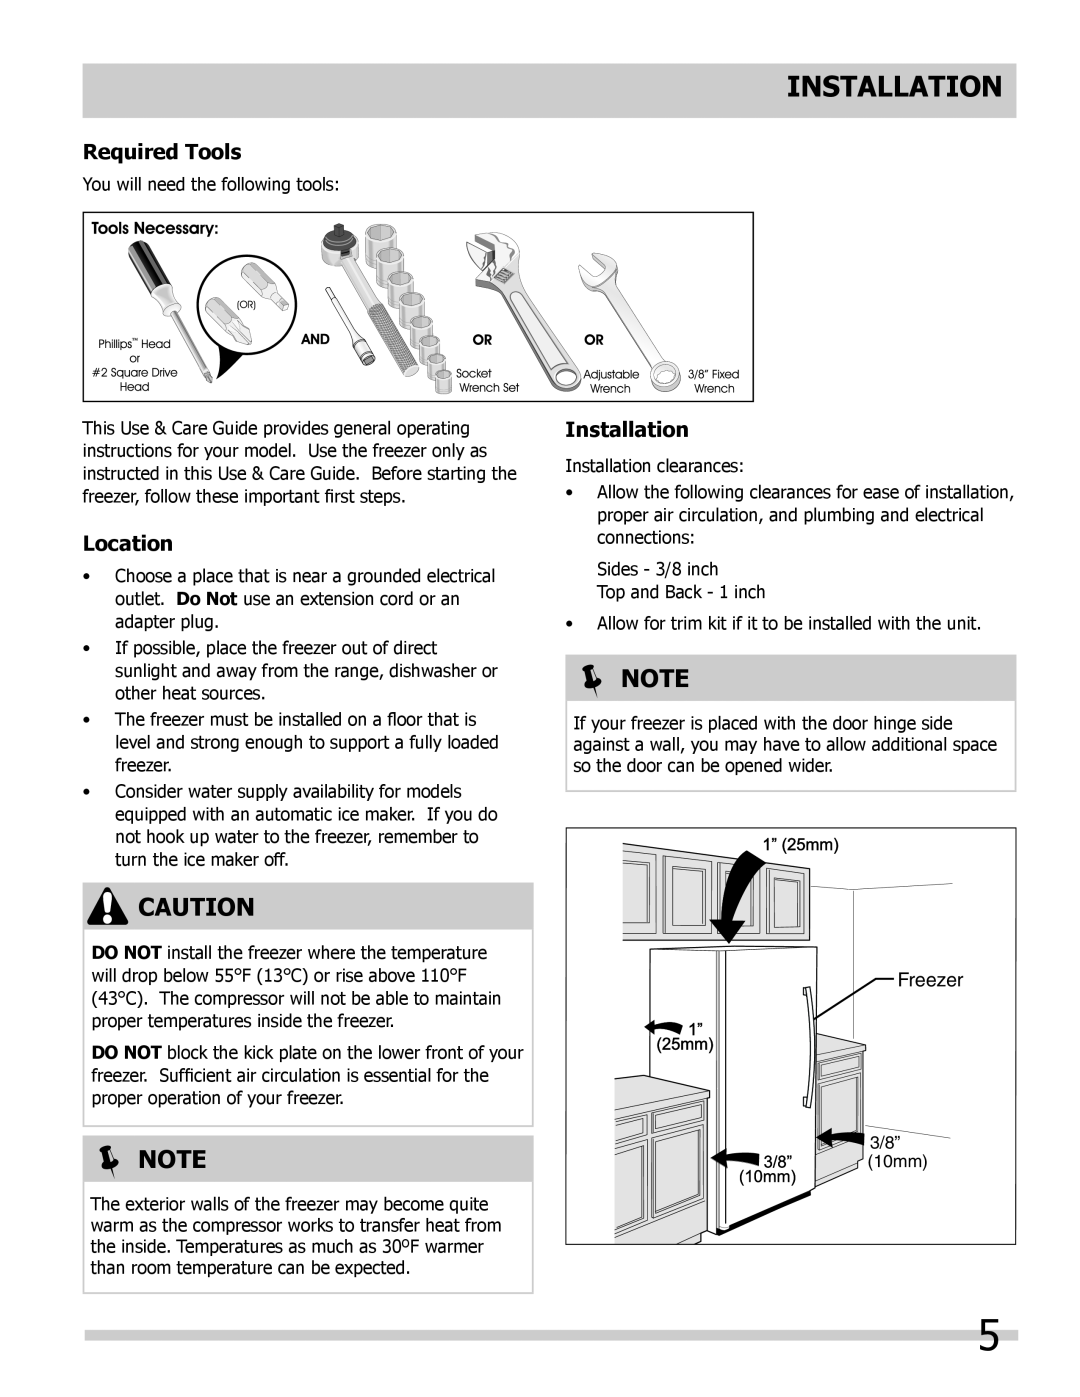 Frigidaire 297298800, FPUH19D7LF important safety instructions Installation, Required Tools, Location,  Note, Freezer 